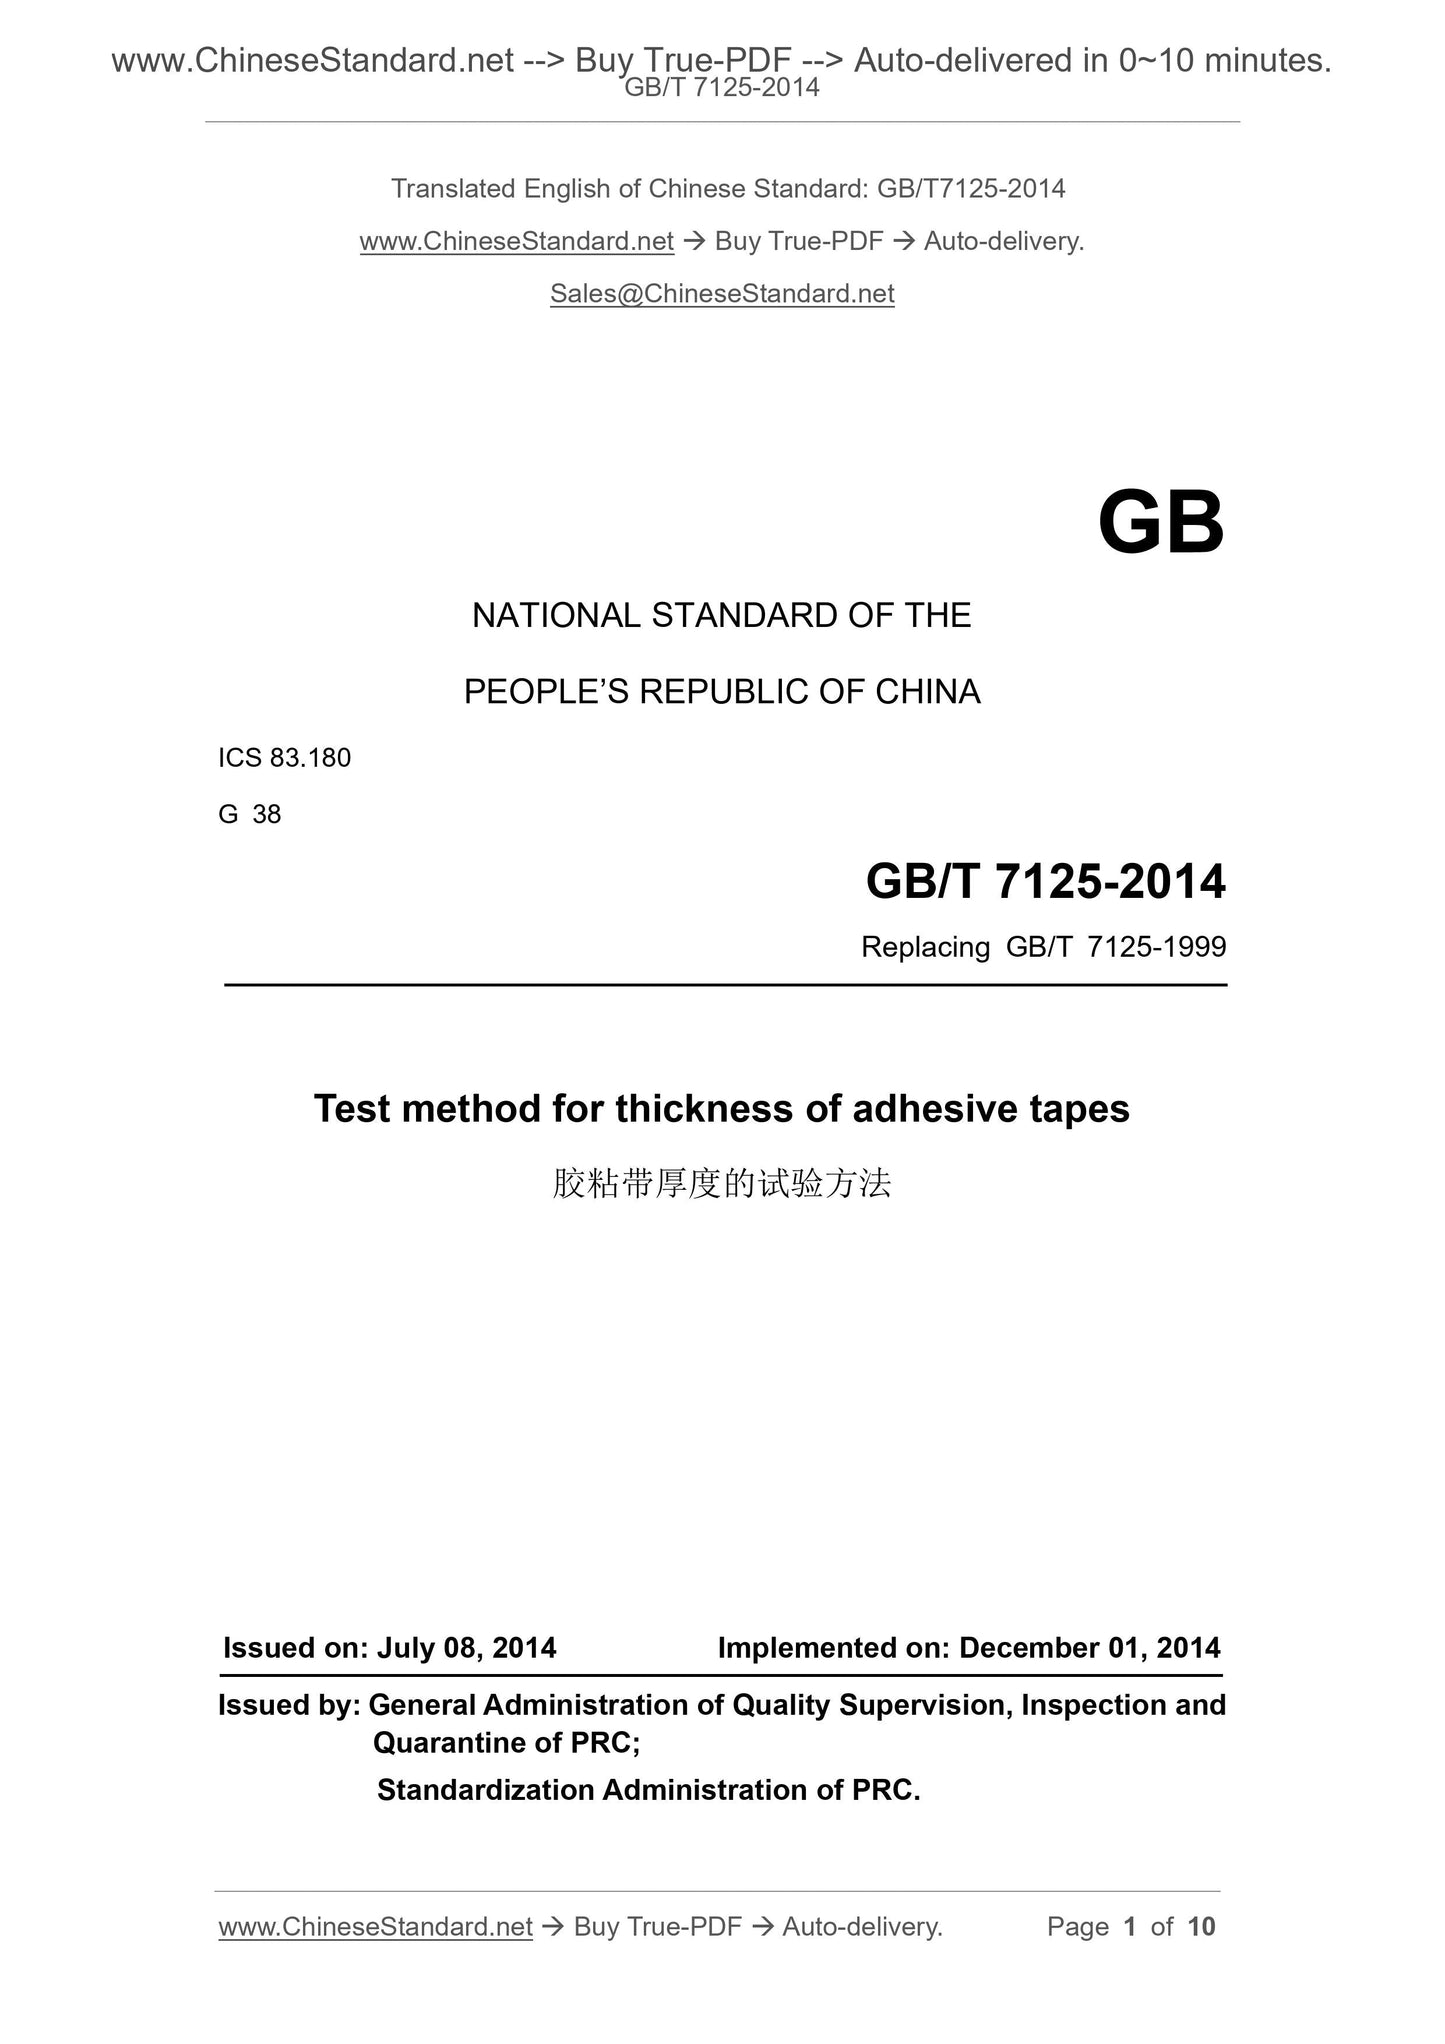 GB/T 7125-2014 Page 1